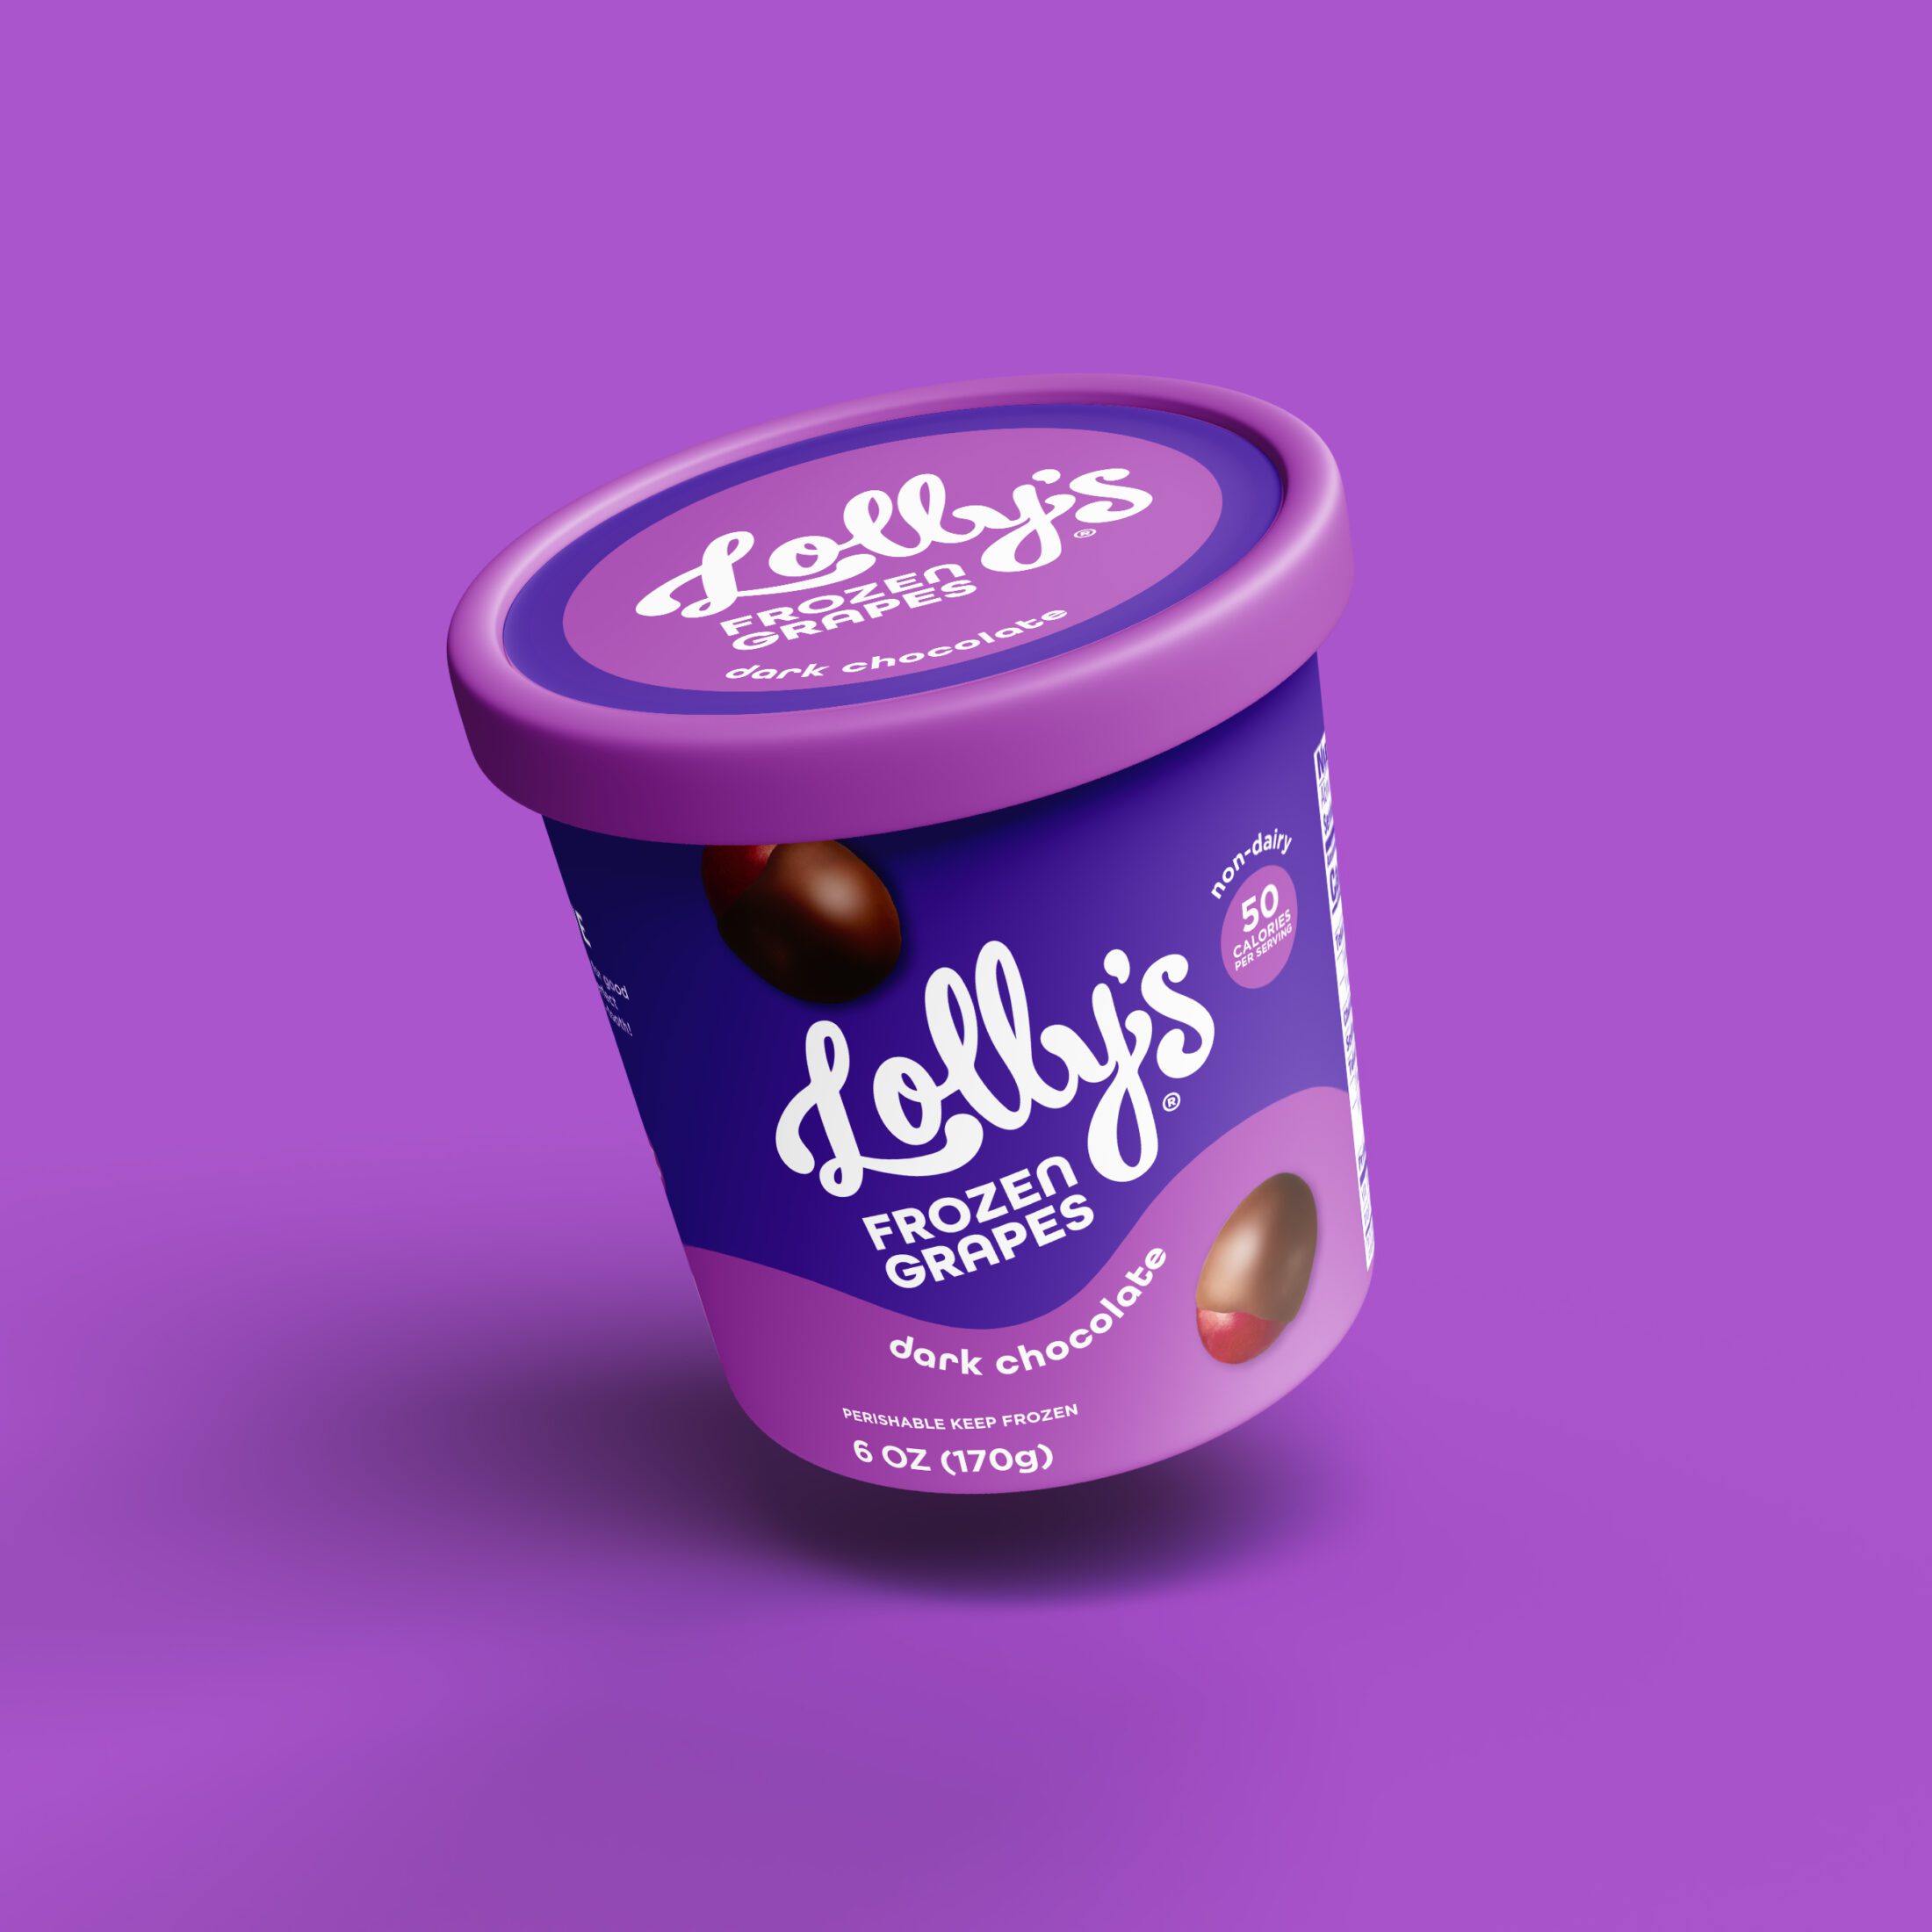 Floating tub of Lolly's Frozen Grapes - Dark Chocolate flavor on a purple background.